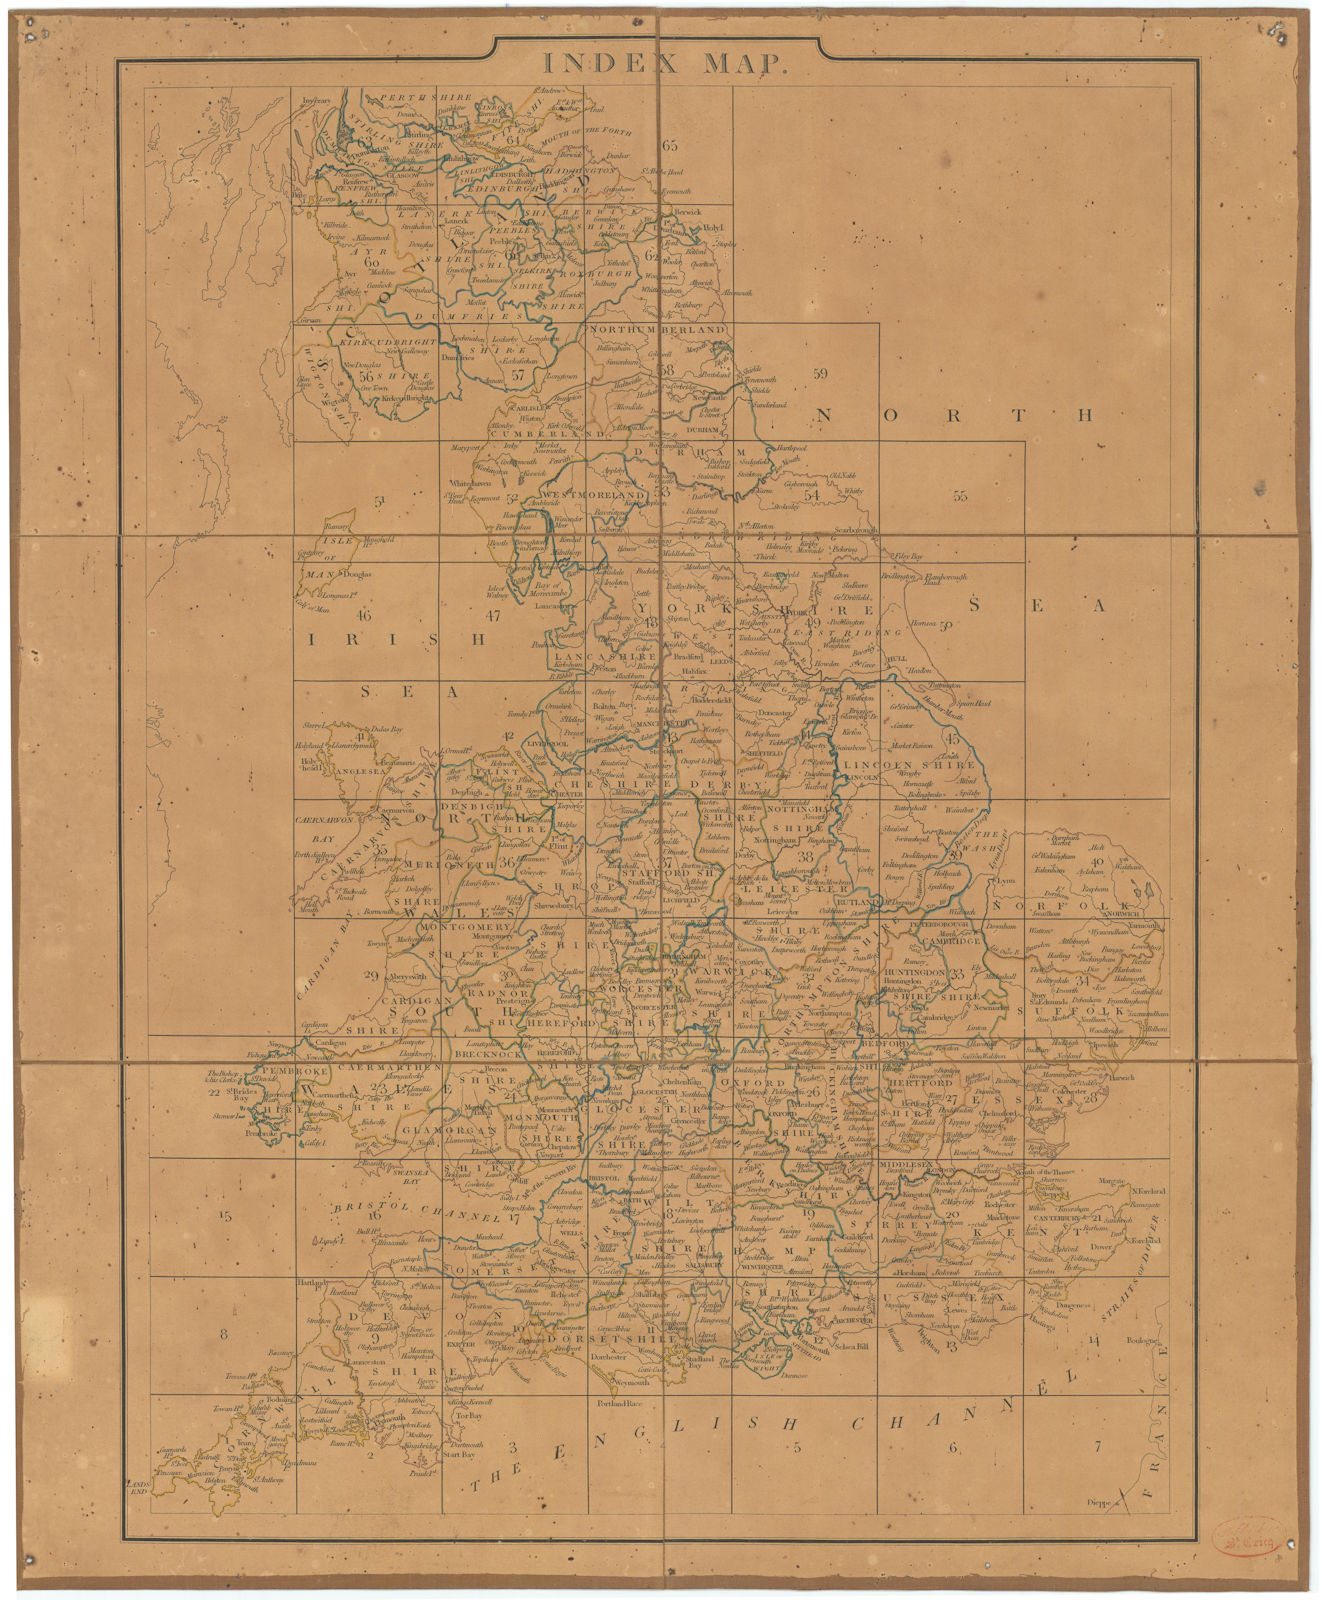 Associate Product Cary's Improved Map of England and Wales - Index map. G. & J. Cary 1832